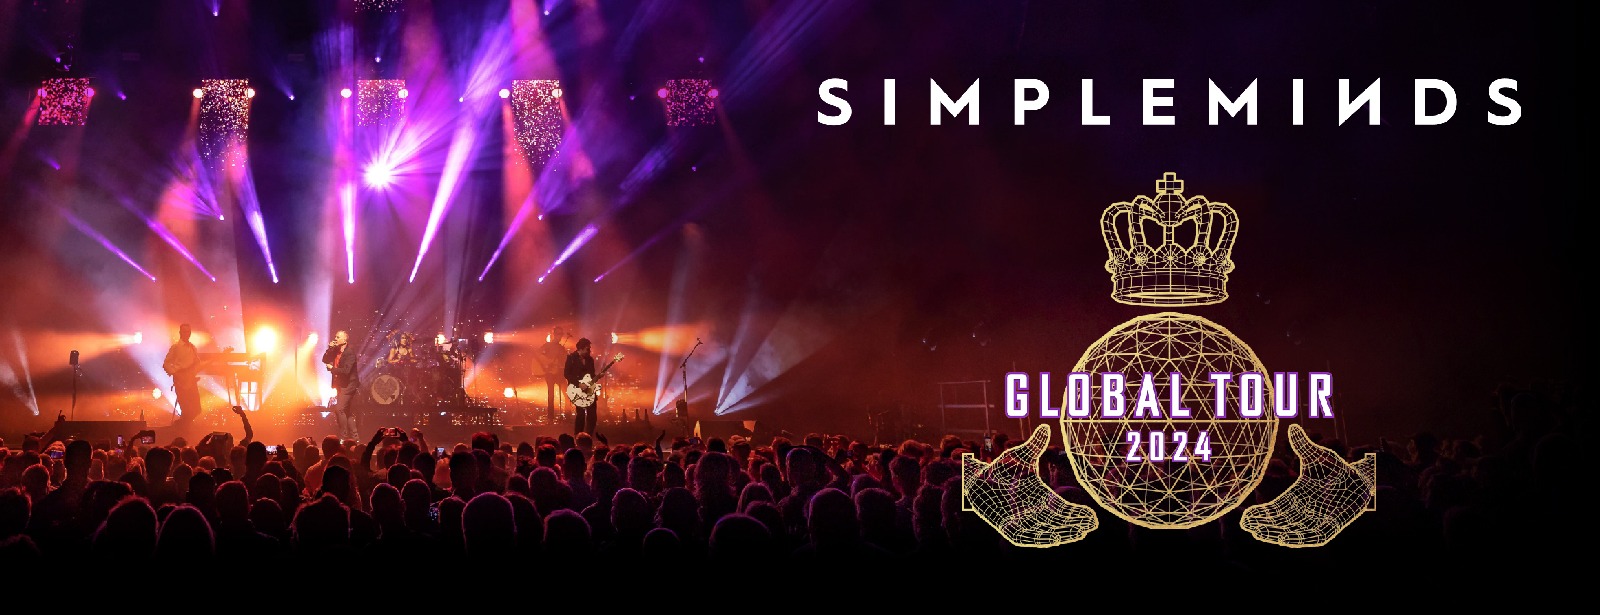 Simple Minds Live in Coca-Cola Arena - Coming Soon in UAE